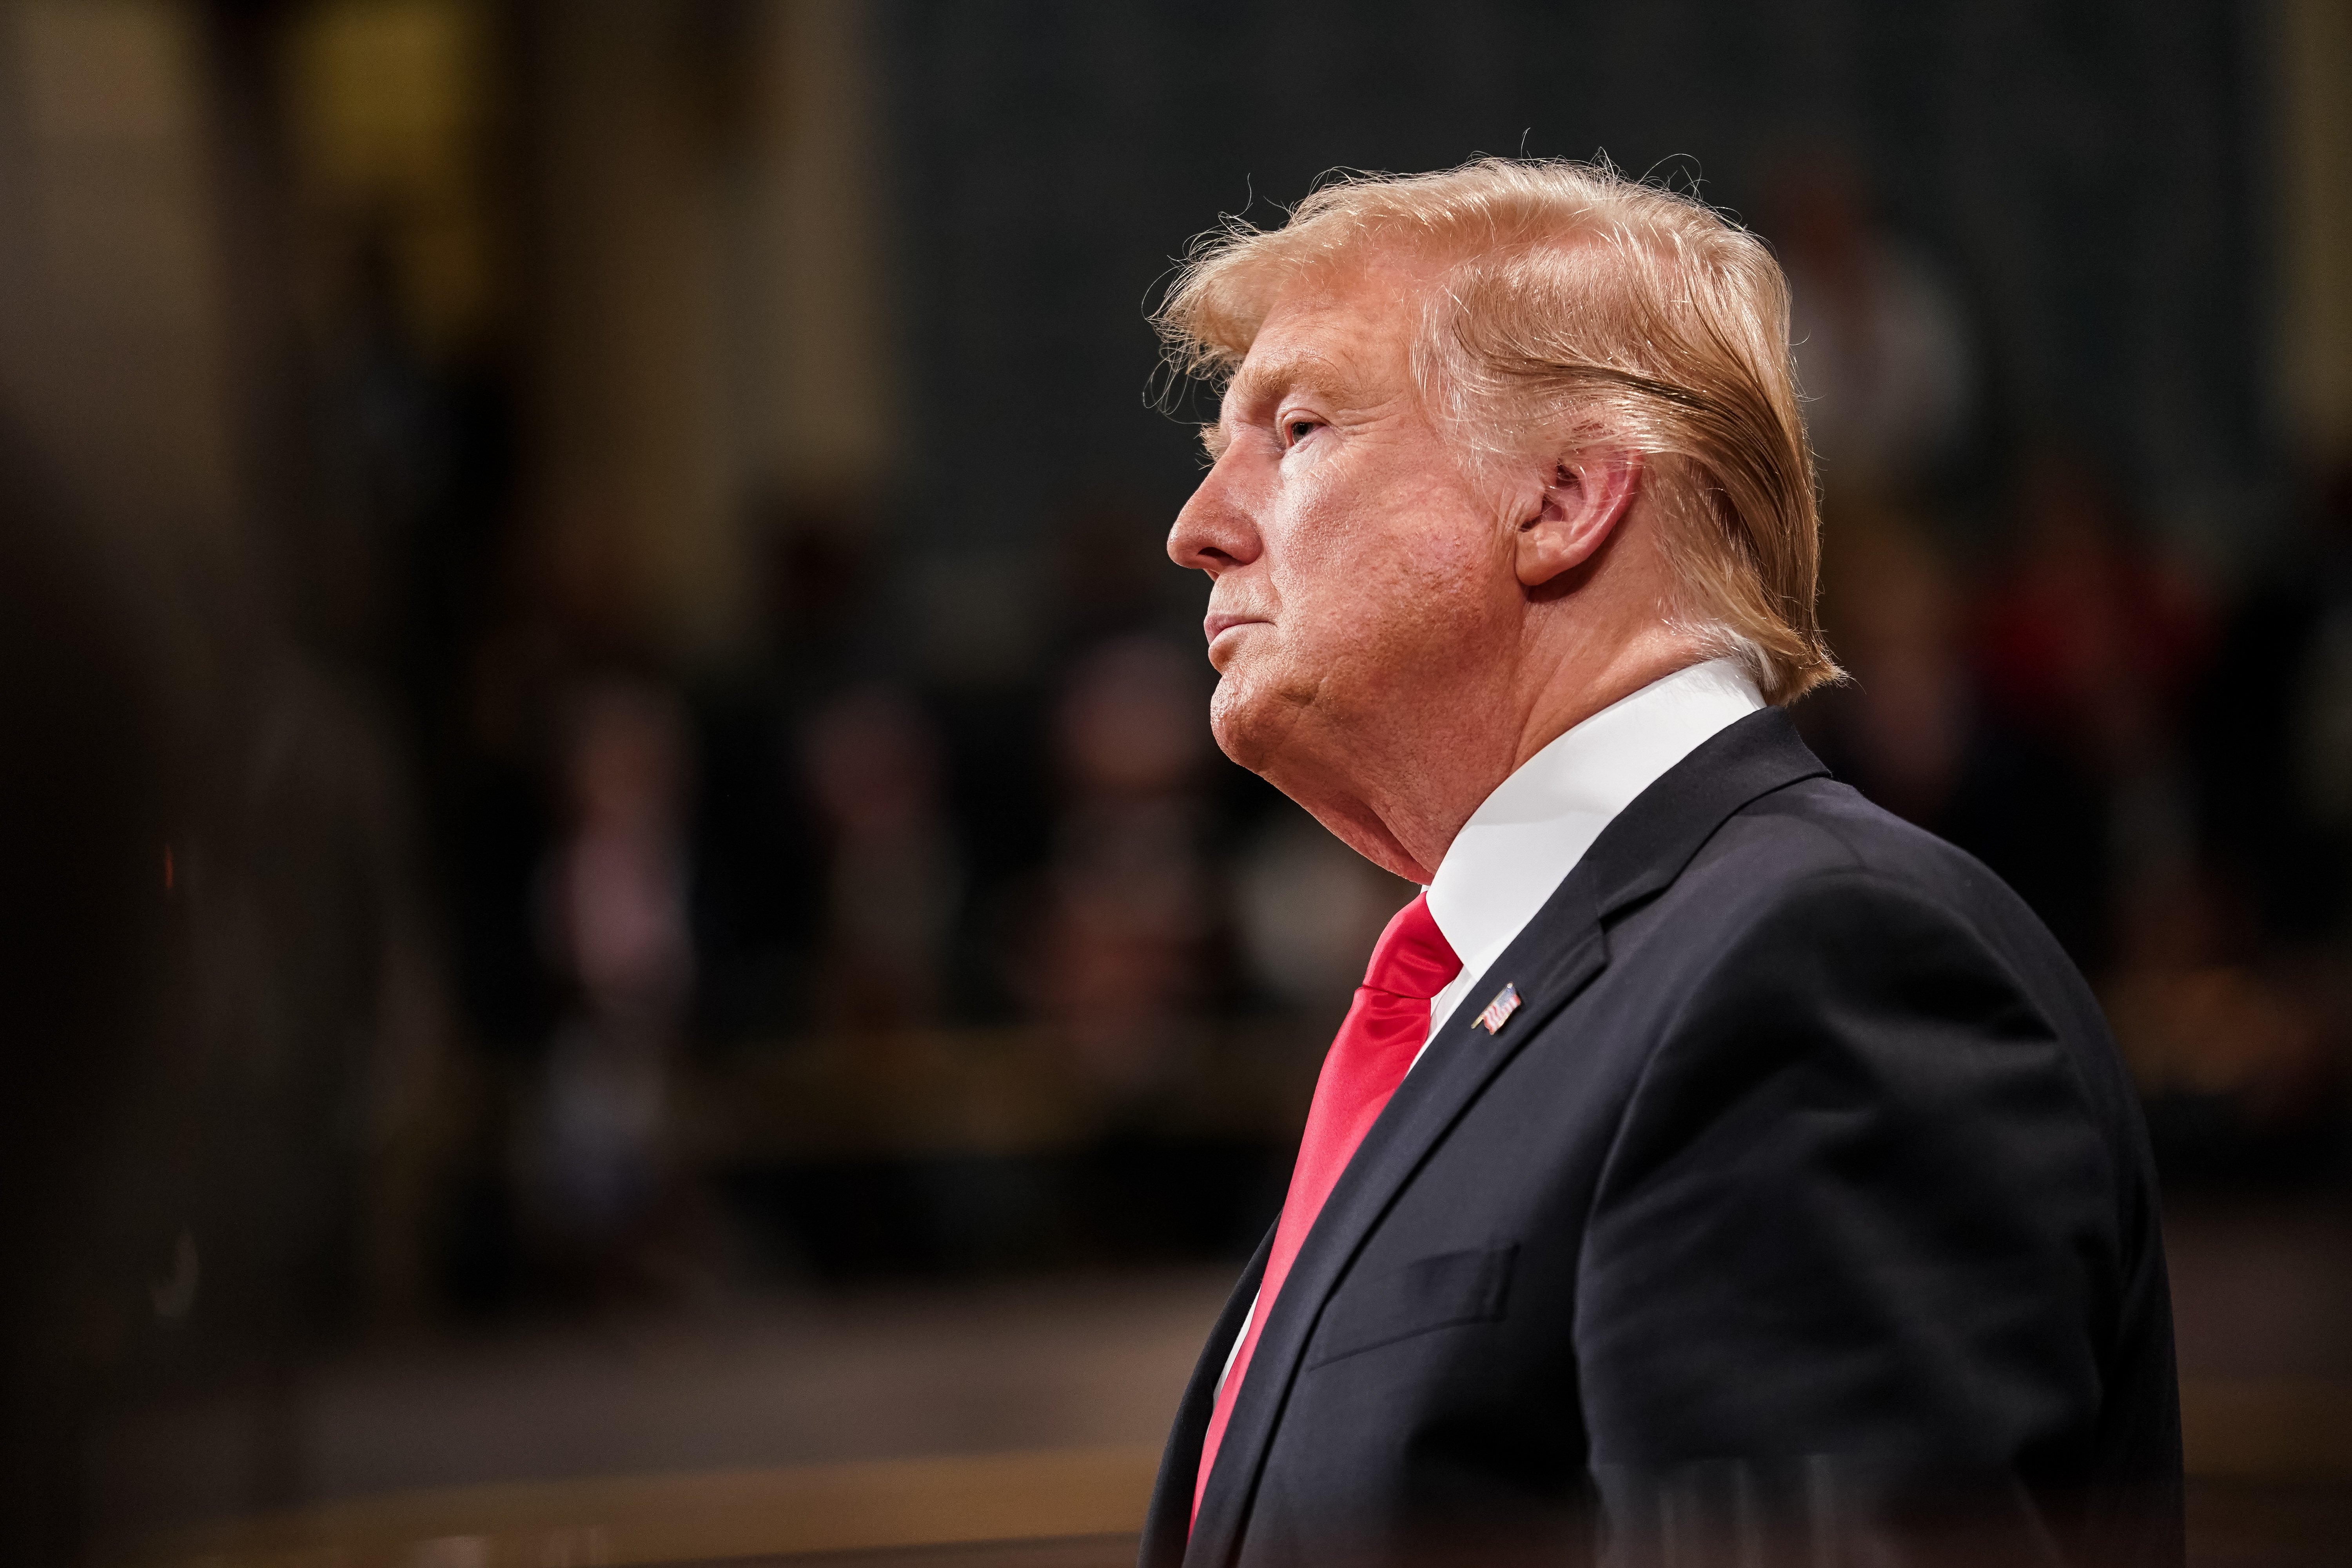 President Donald Trump at the State of the Union address | Photo: Getty Images